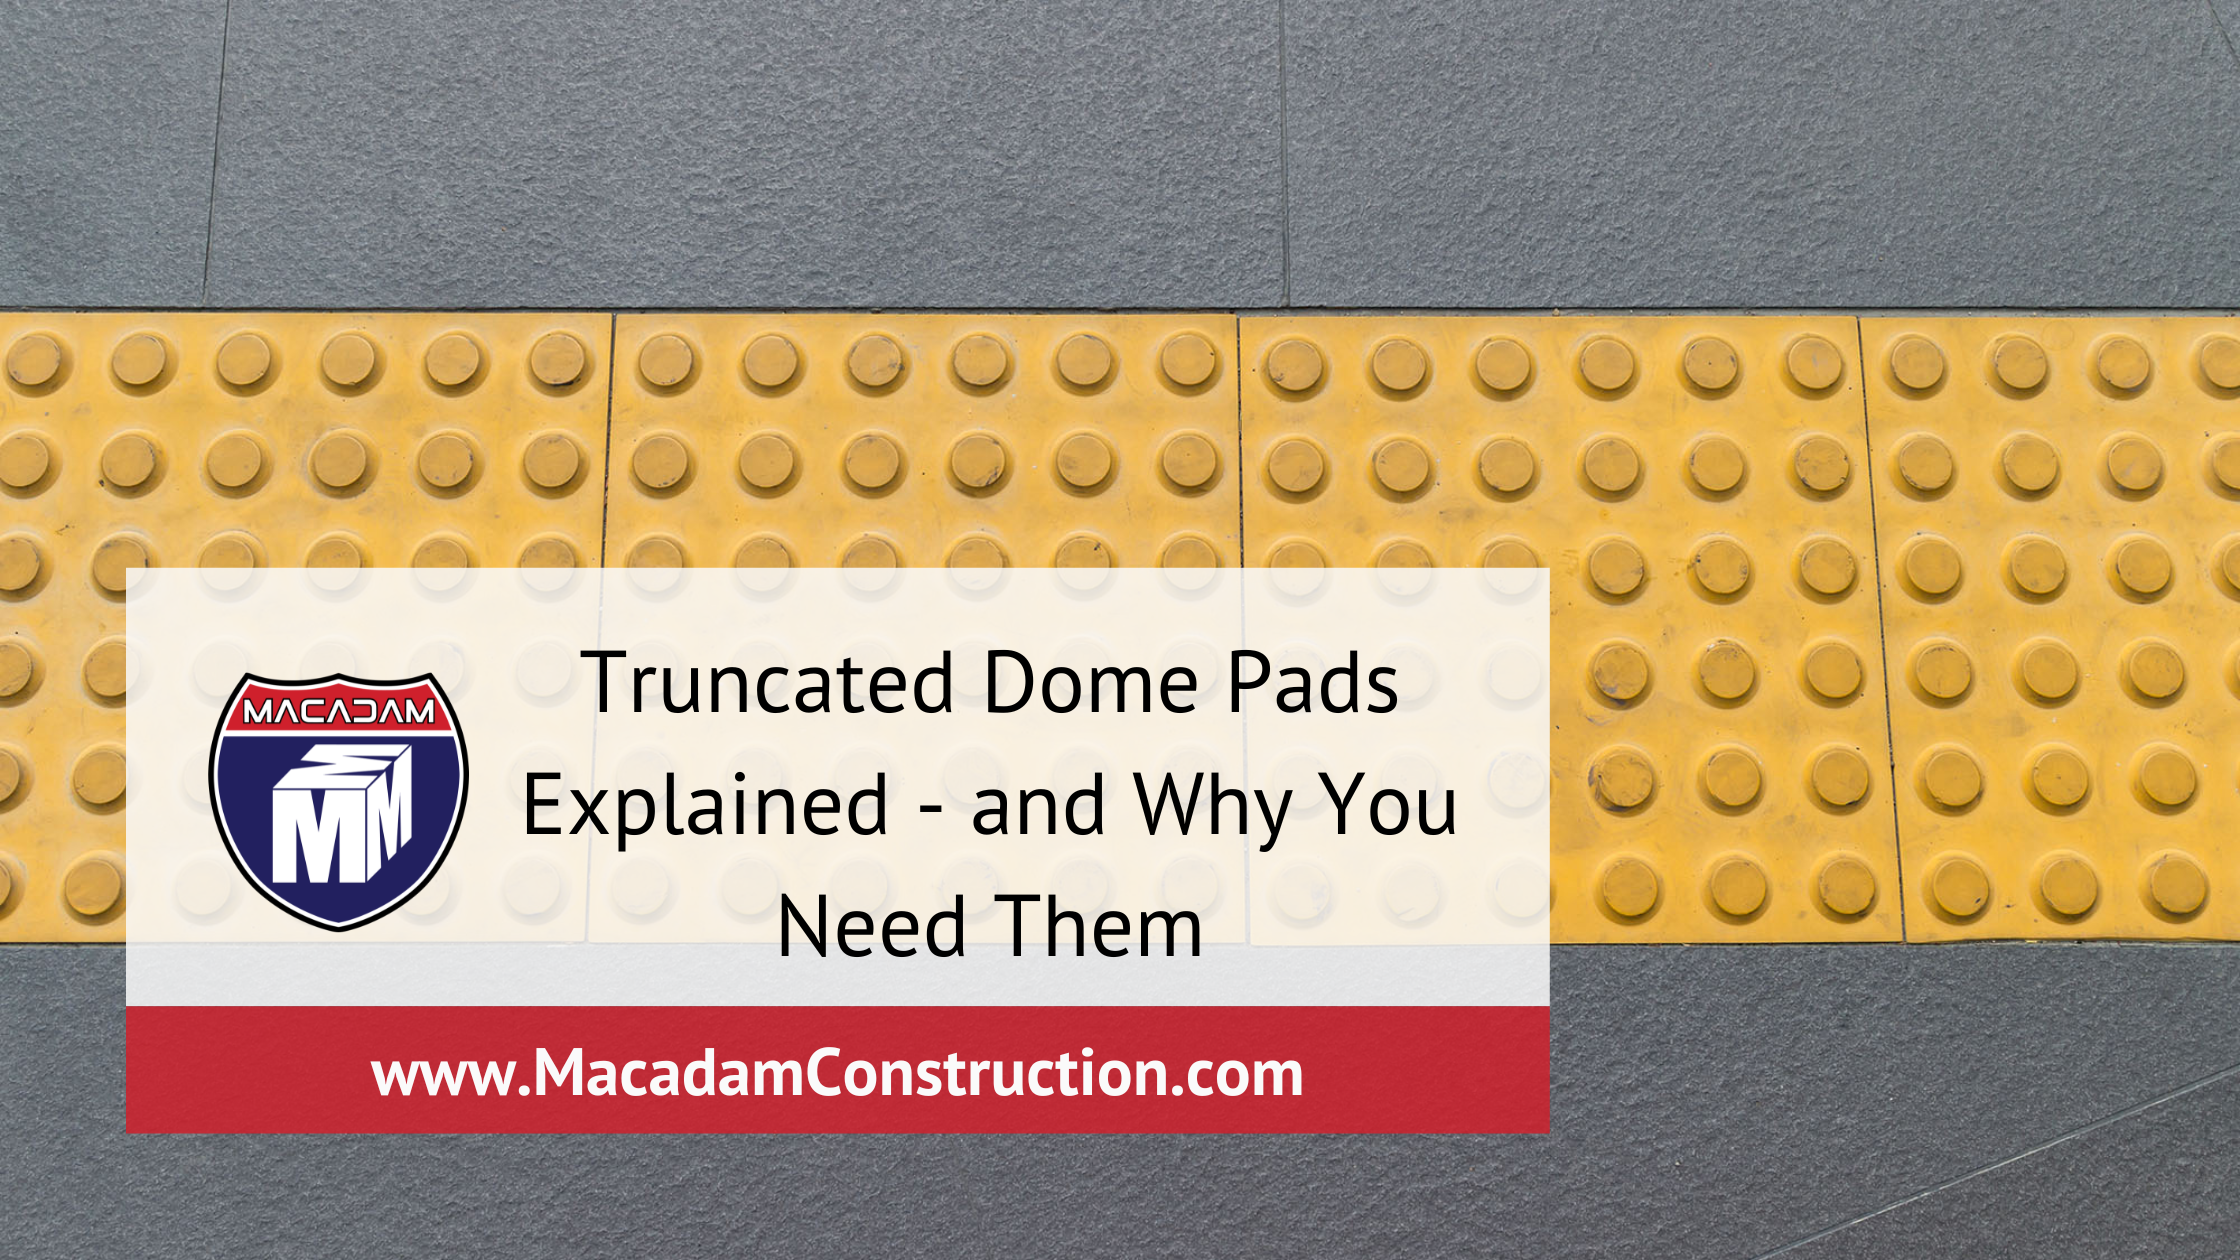 truncated dome pads explained and why you need them